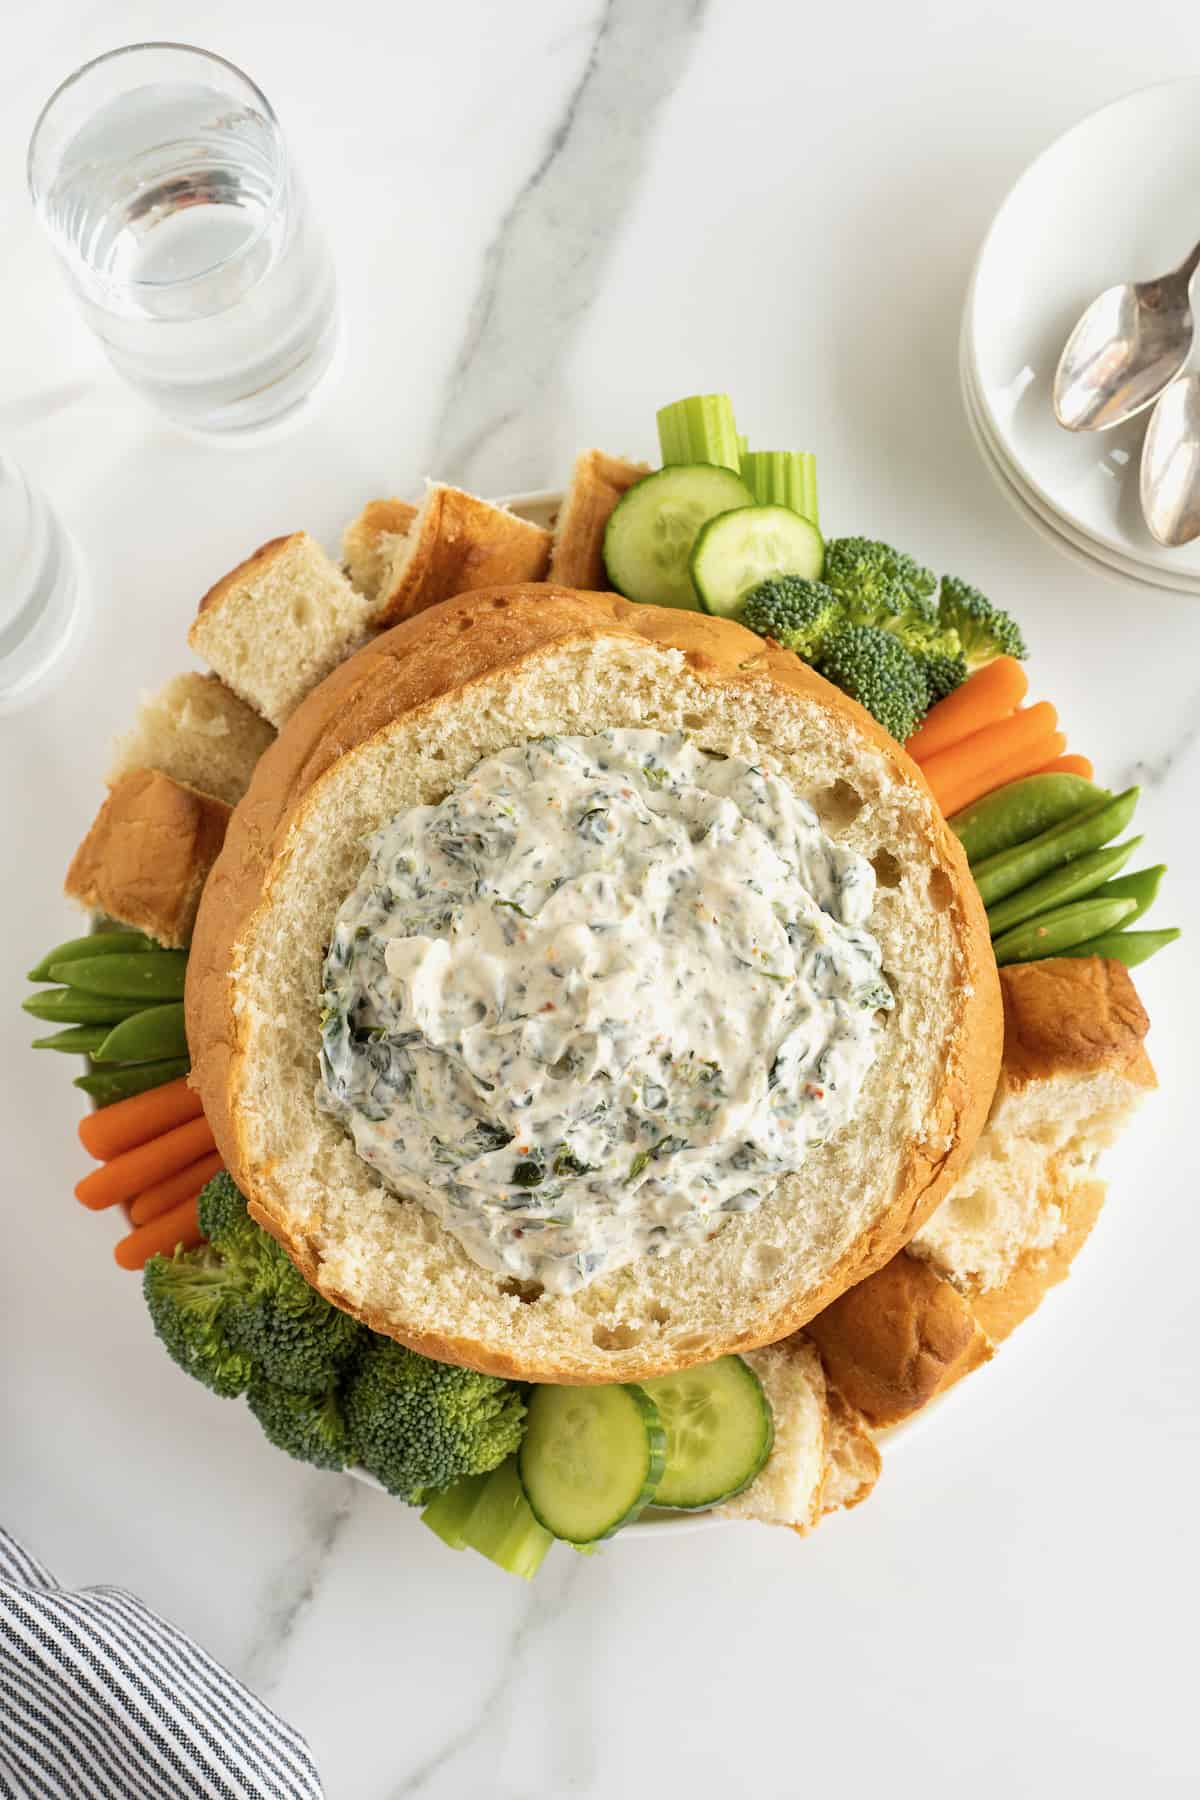 Creamy spinach in a bread bowl surrounded by fresh vegetables and bread chunks.